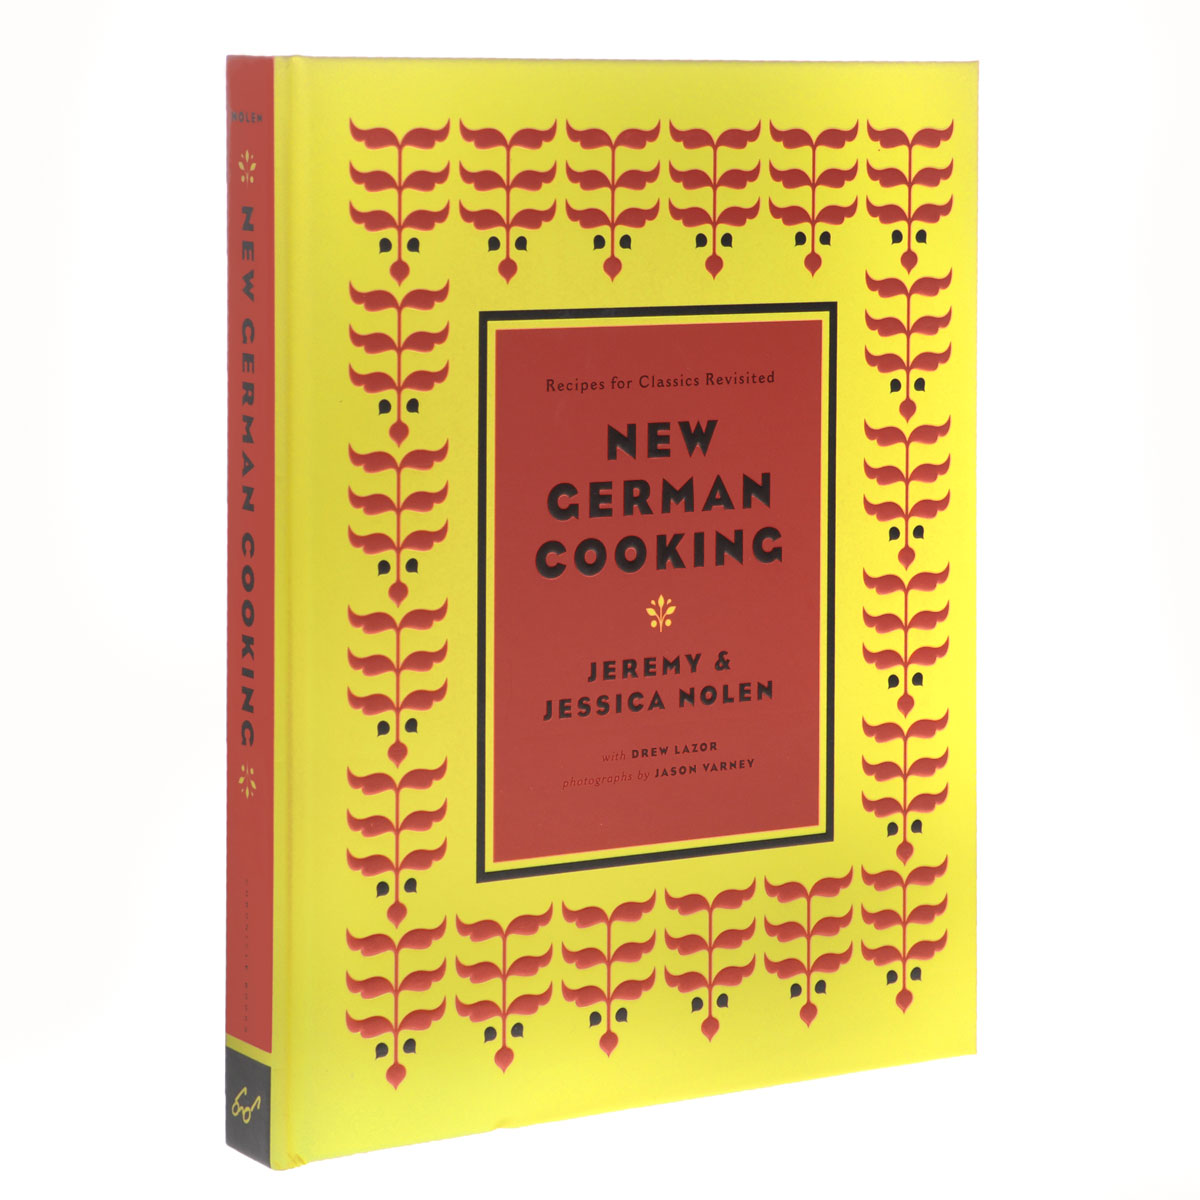 New German Cooking: Recipes for Classics Revisited